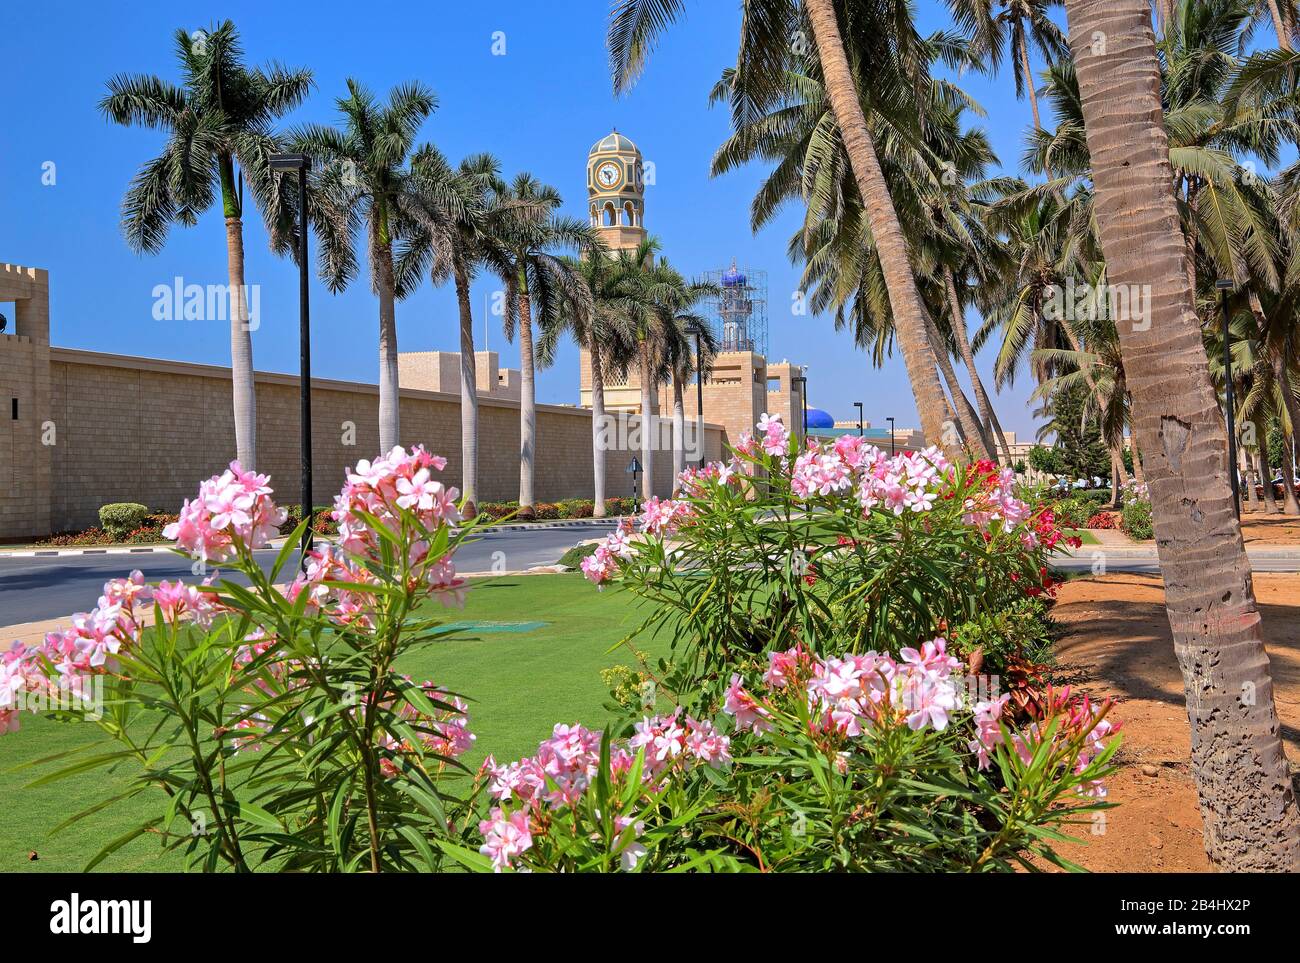 Palm trees with palace wall and clock tower from the sultan palace, Salalah, Arabian Sea, Oman Stock Photo